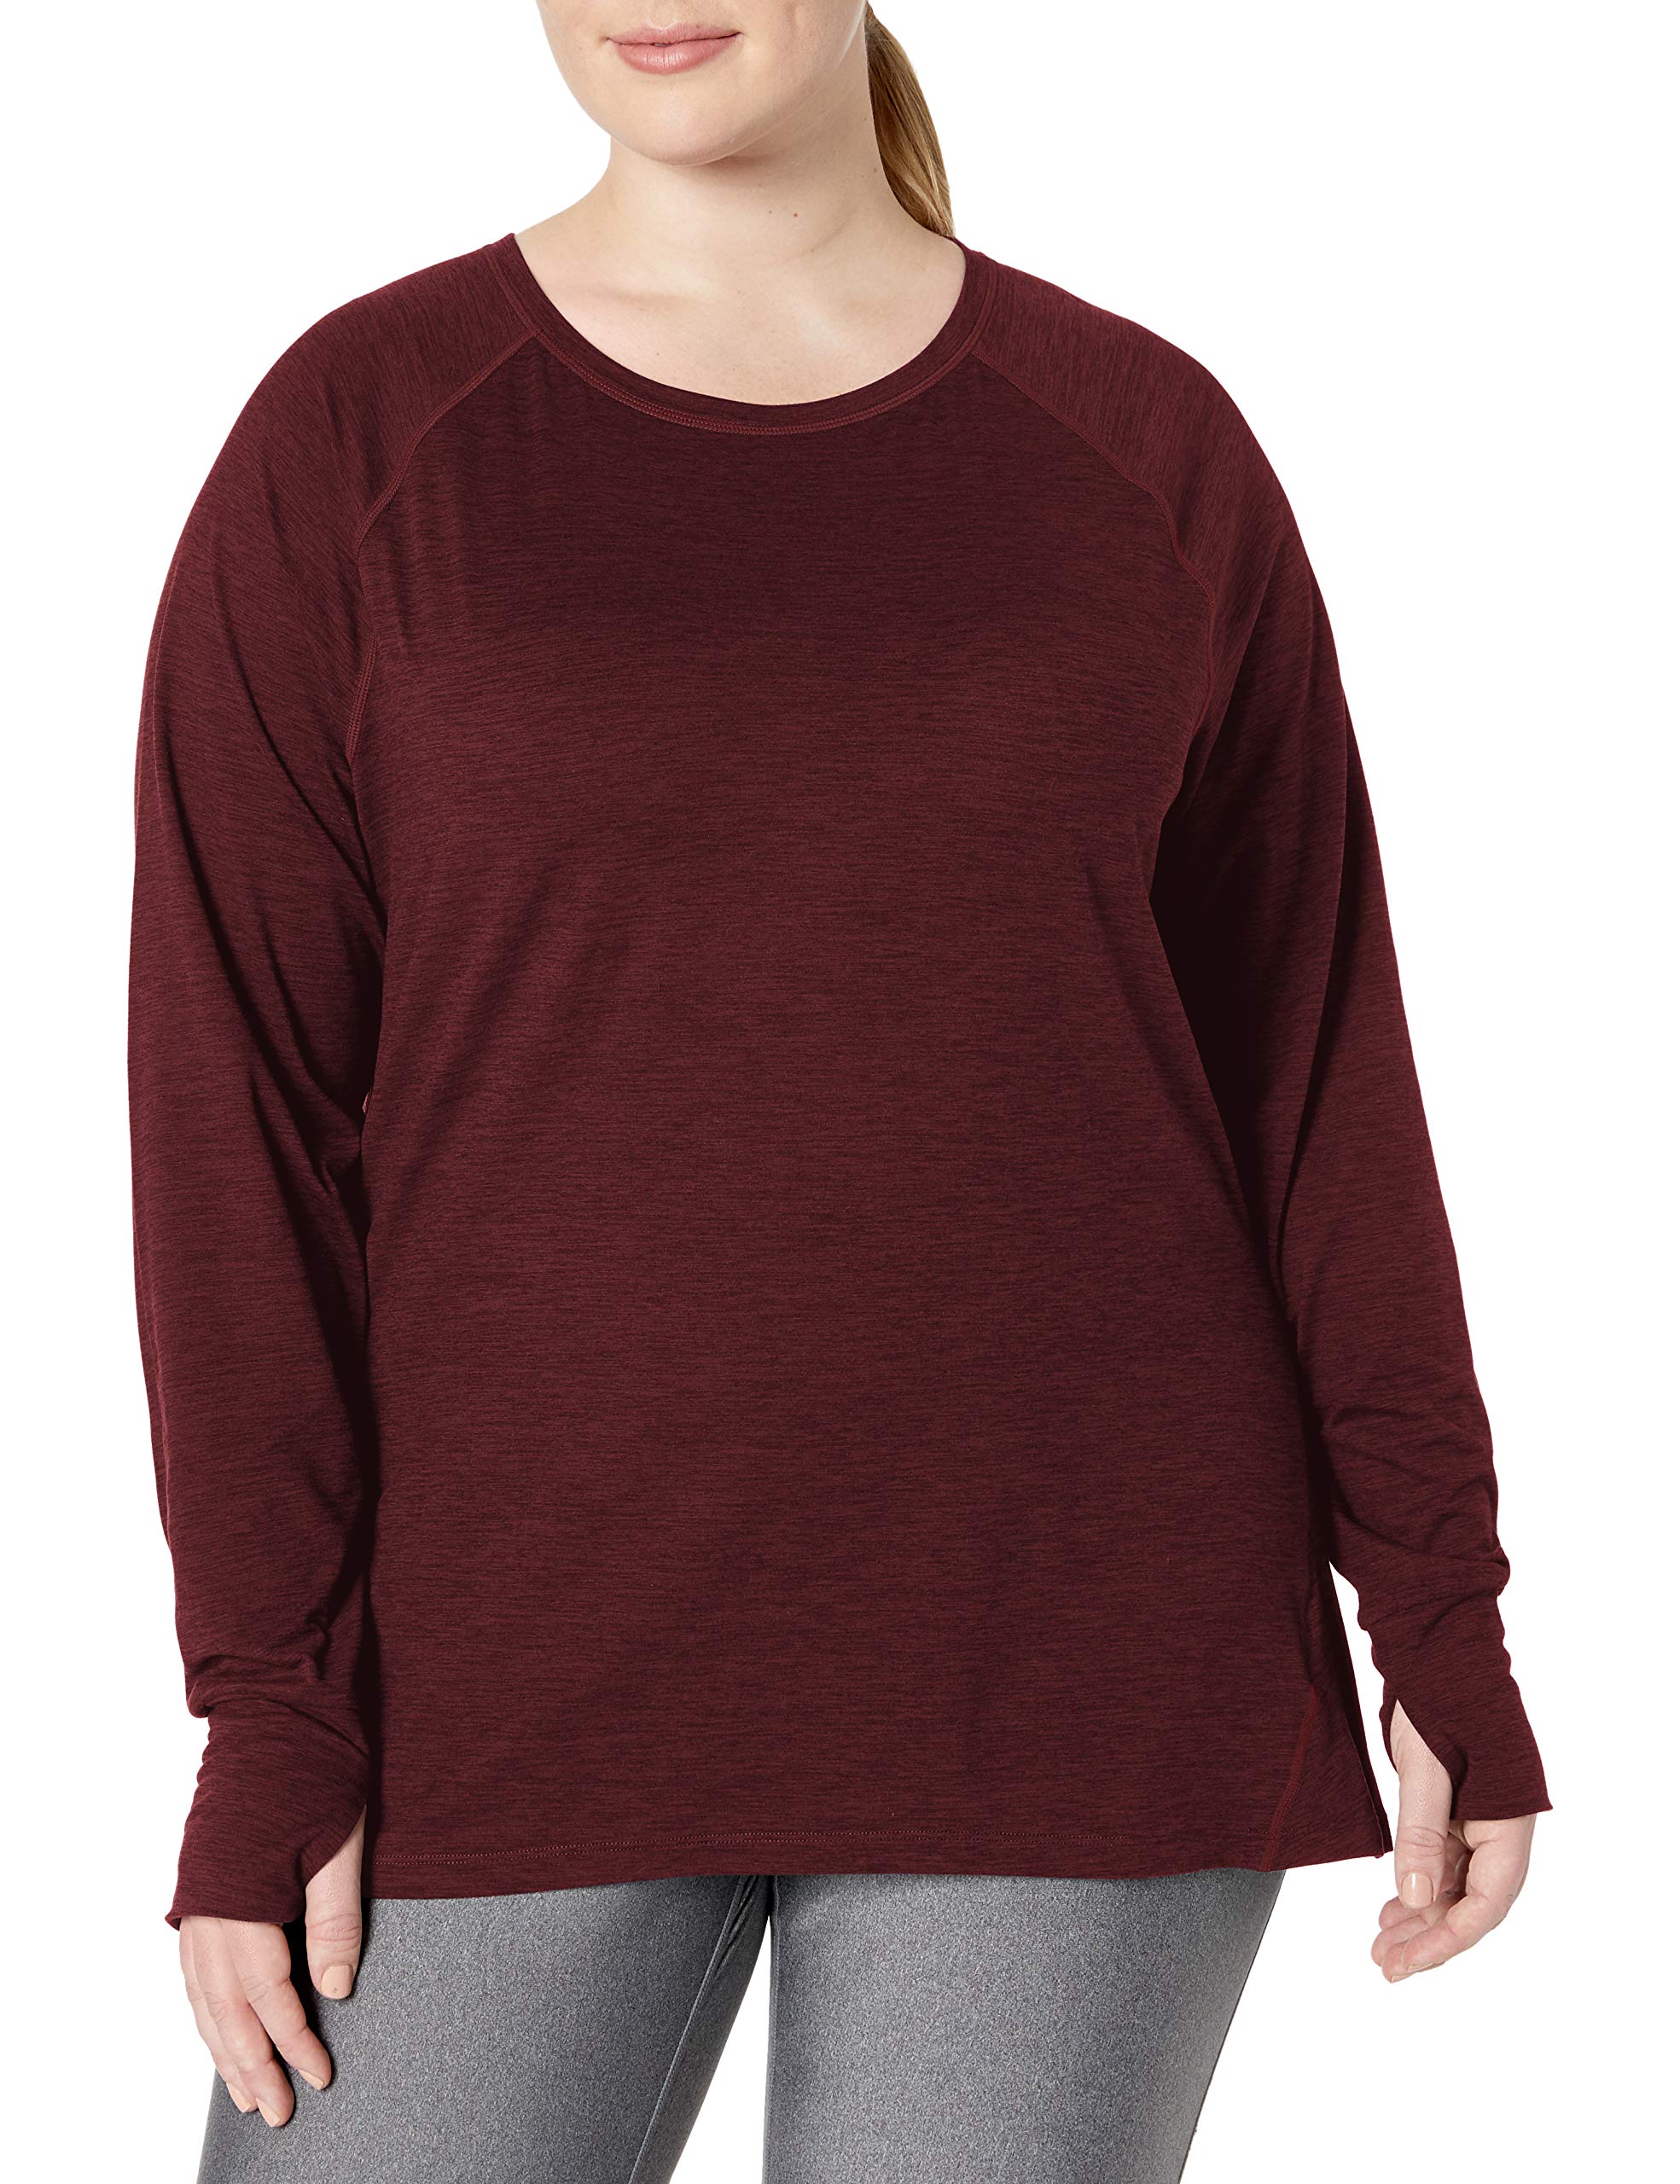 Amazon Essentials Women's Brushed Tech Stretch Long-Sleeve Crewneck Shirt (Burgundy Space Dye) $6.50 + Free Shipping w/ Prime or on $35+